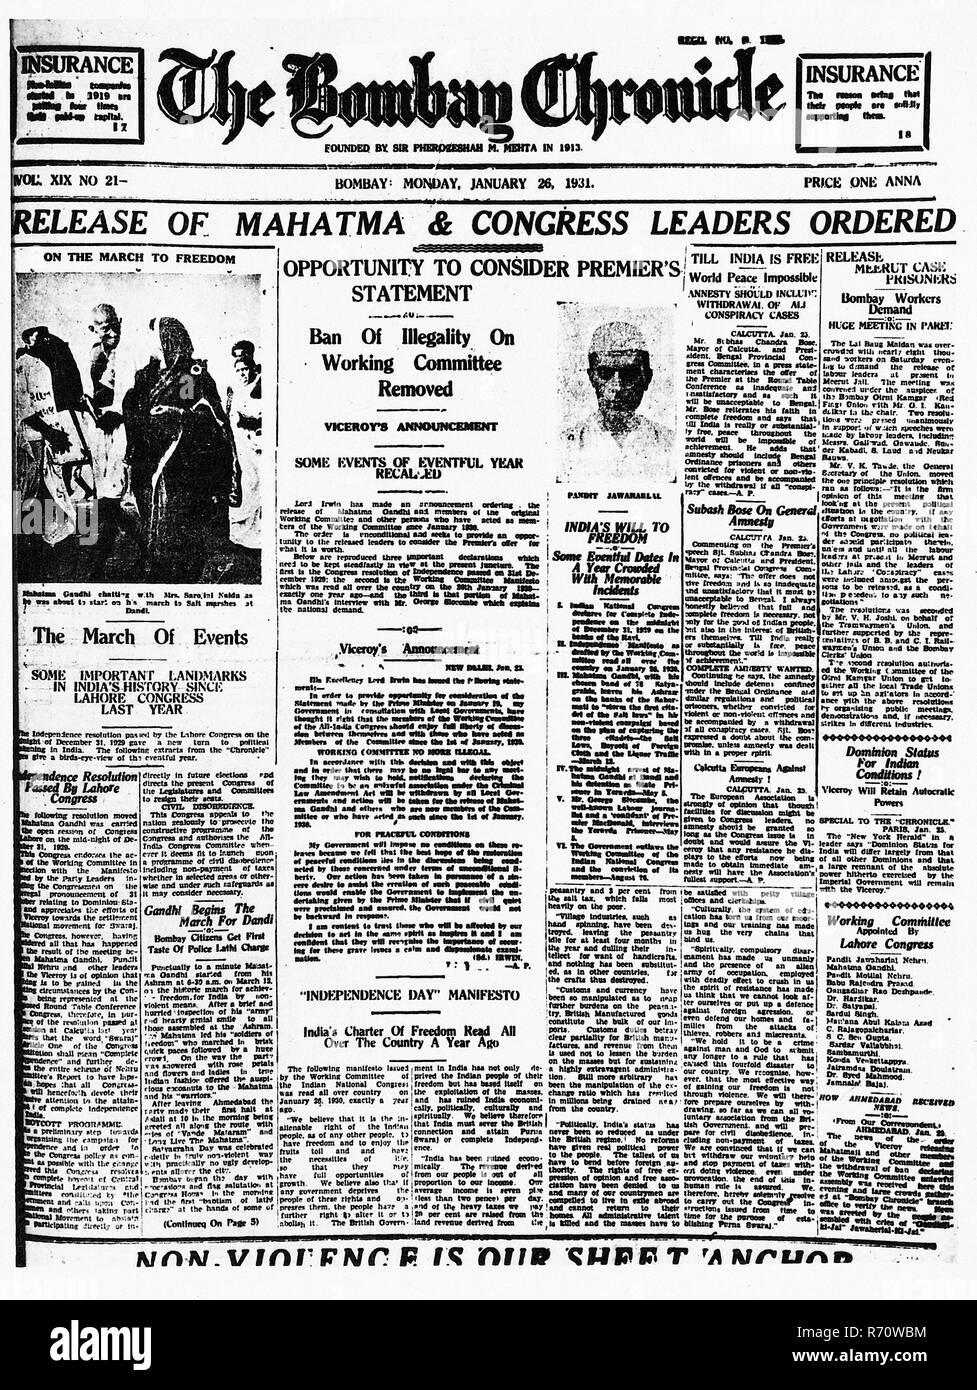 Mahatma Gandhi news on front page of The Bombay Chronicle newspaper, Bombay, Mumbai, India, January 26, 1931, old vintage 1900s picture Stock Photo